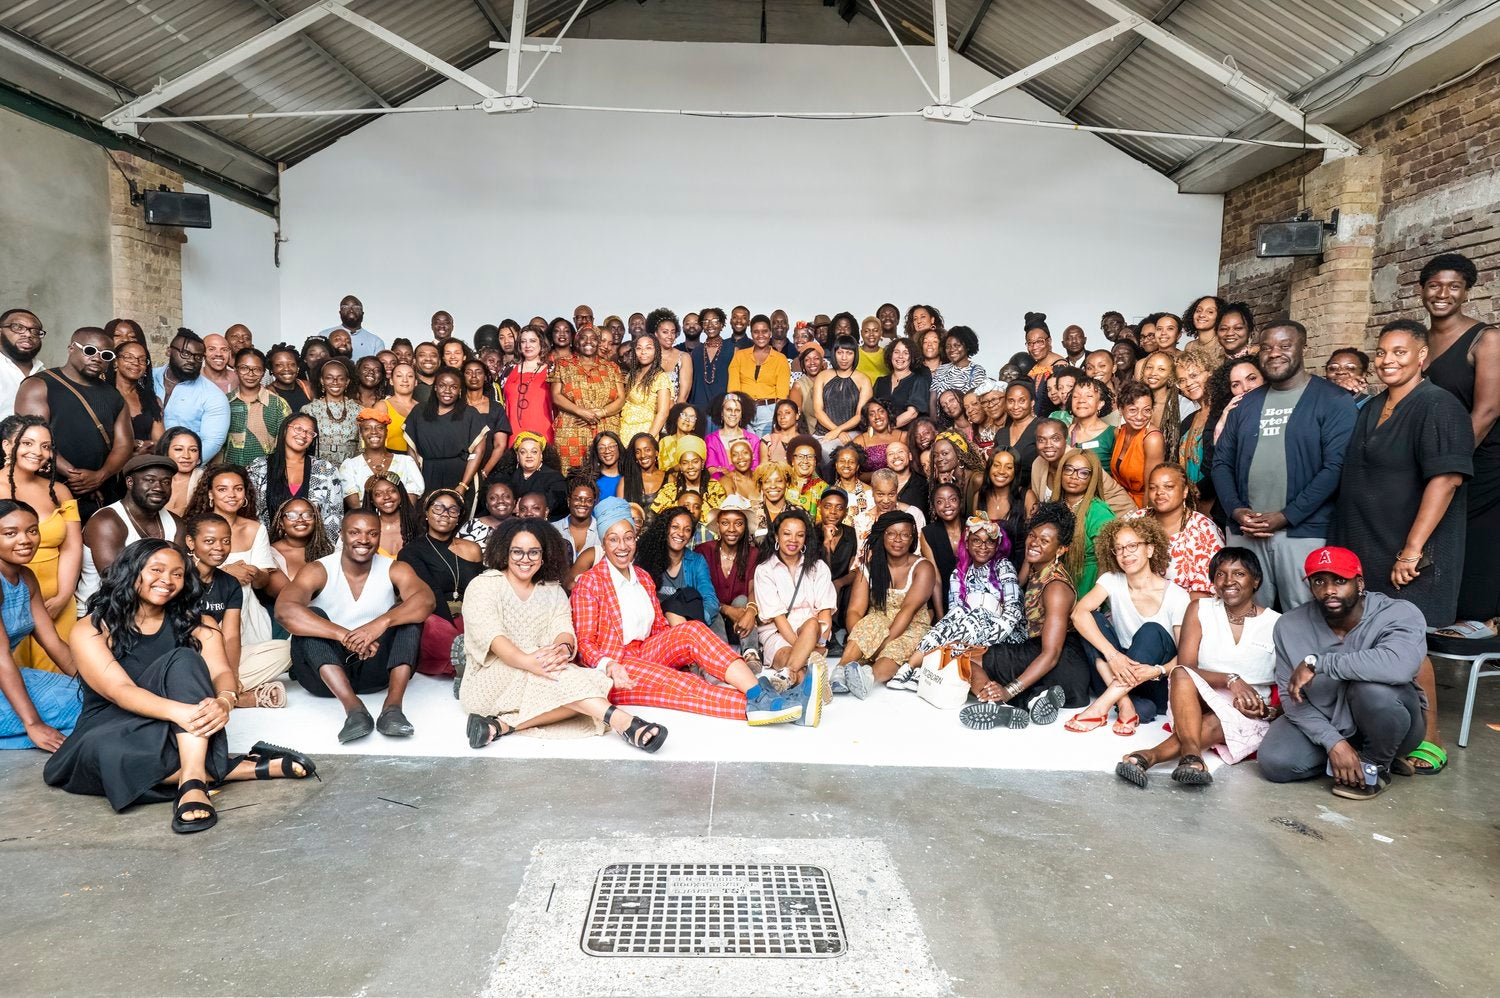 June saw the Black Writers’ Guild launch the Mary Prince Memorial Award to provide financial support for writers over 35 and of African and African-Caribbean heritage living in Britain